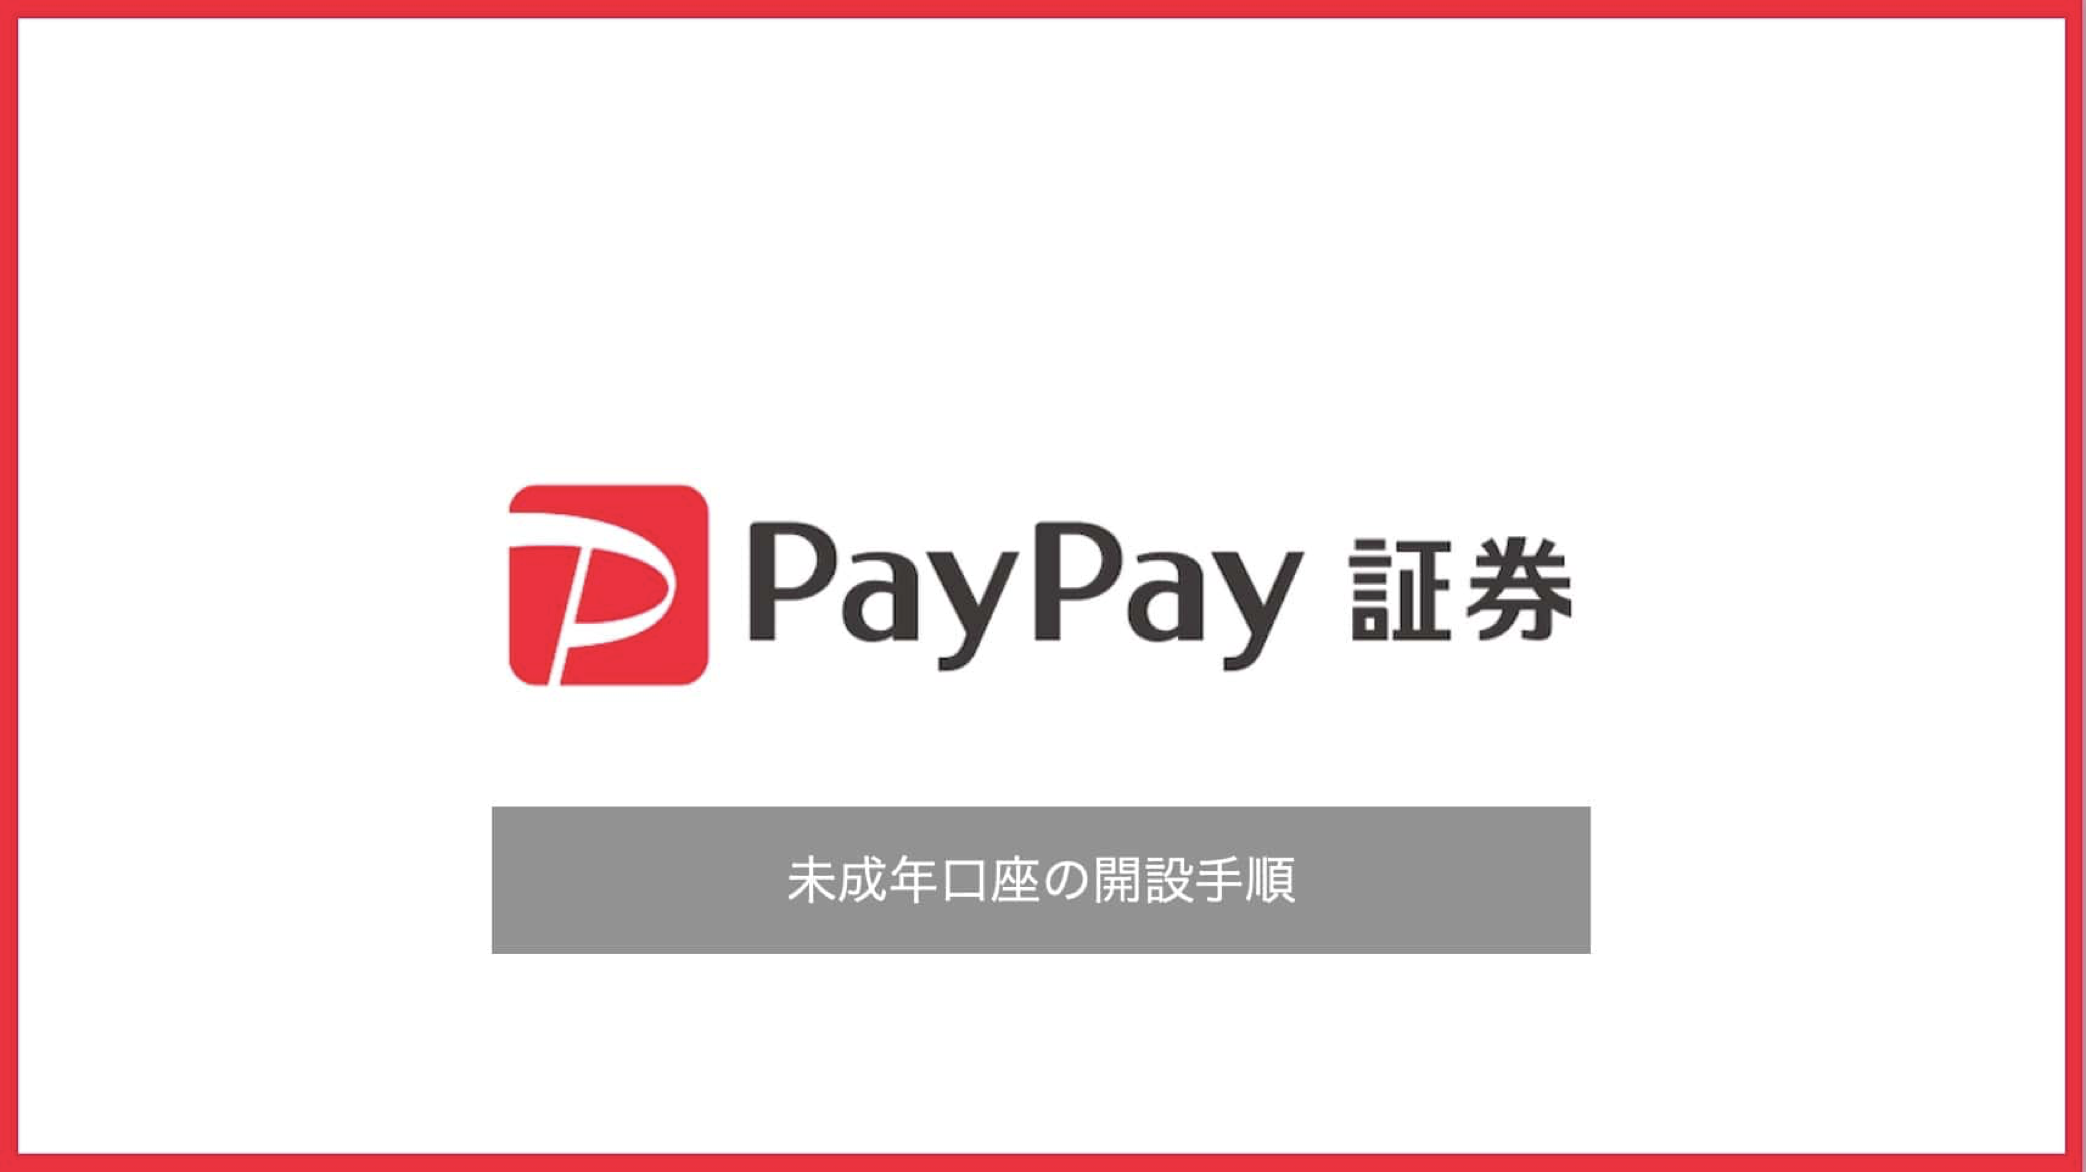 PayPay証券は何歳から使えるか解説